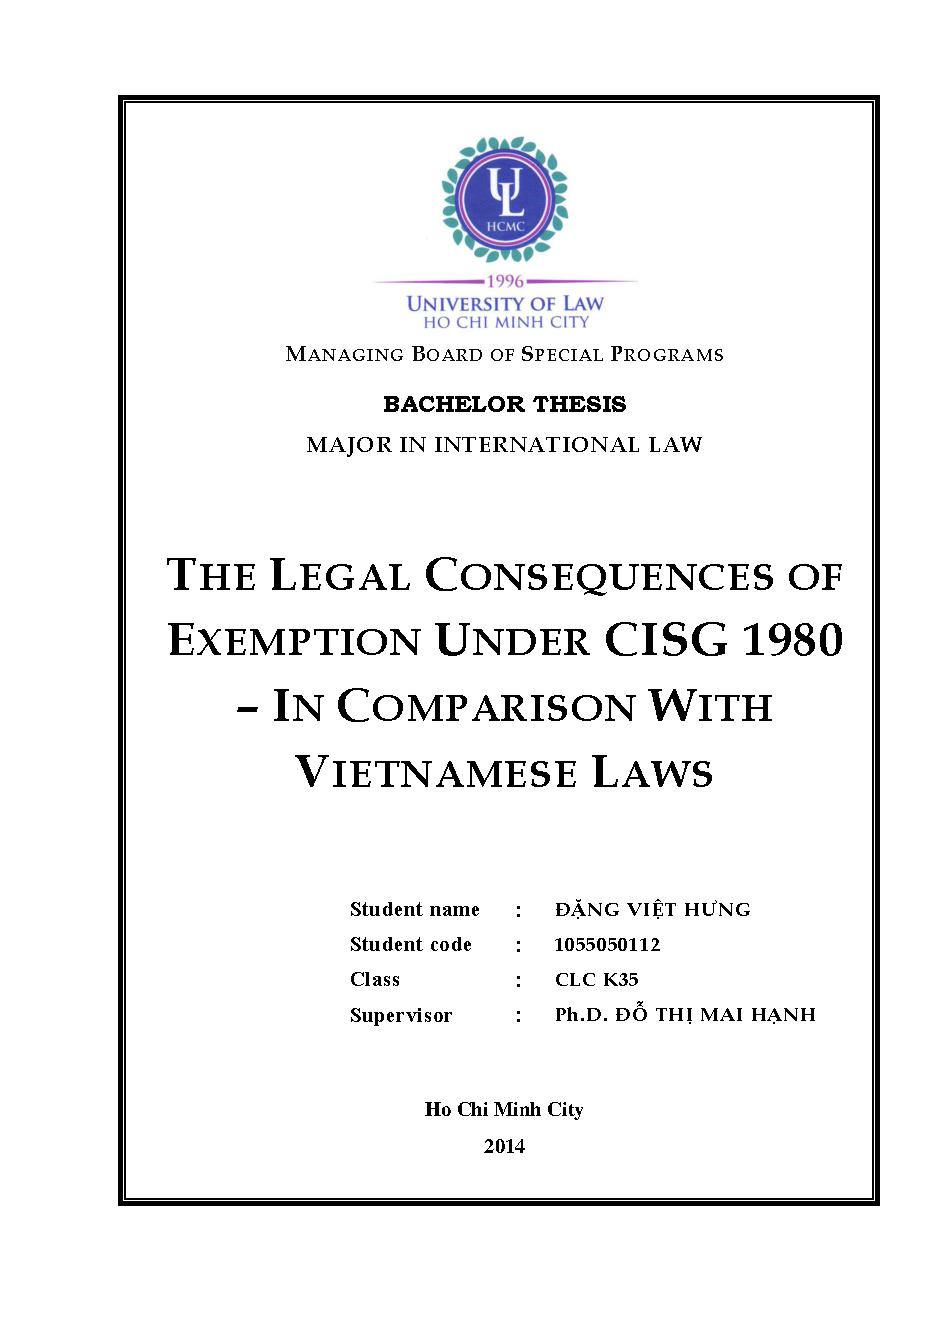 The Legal Consequences of Exemption under CISG 1980 - Incomparison with Vietnamese Laws